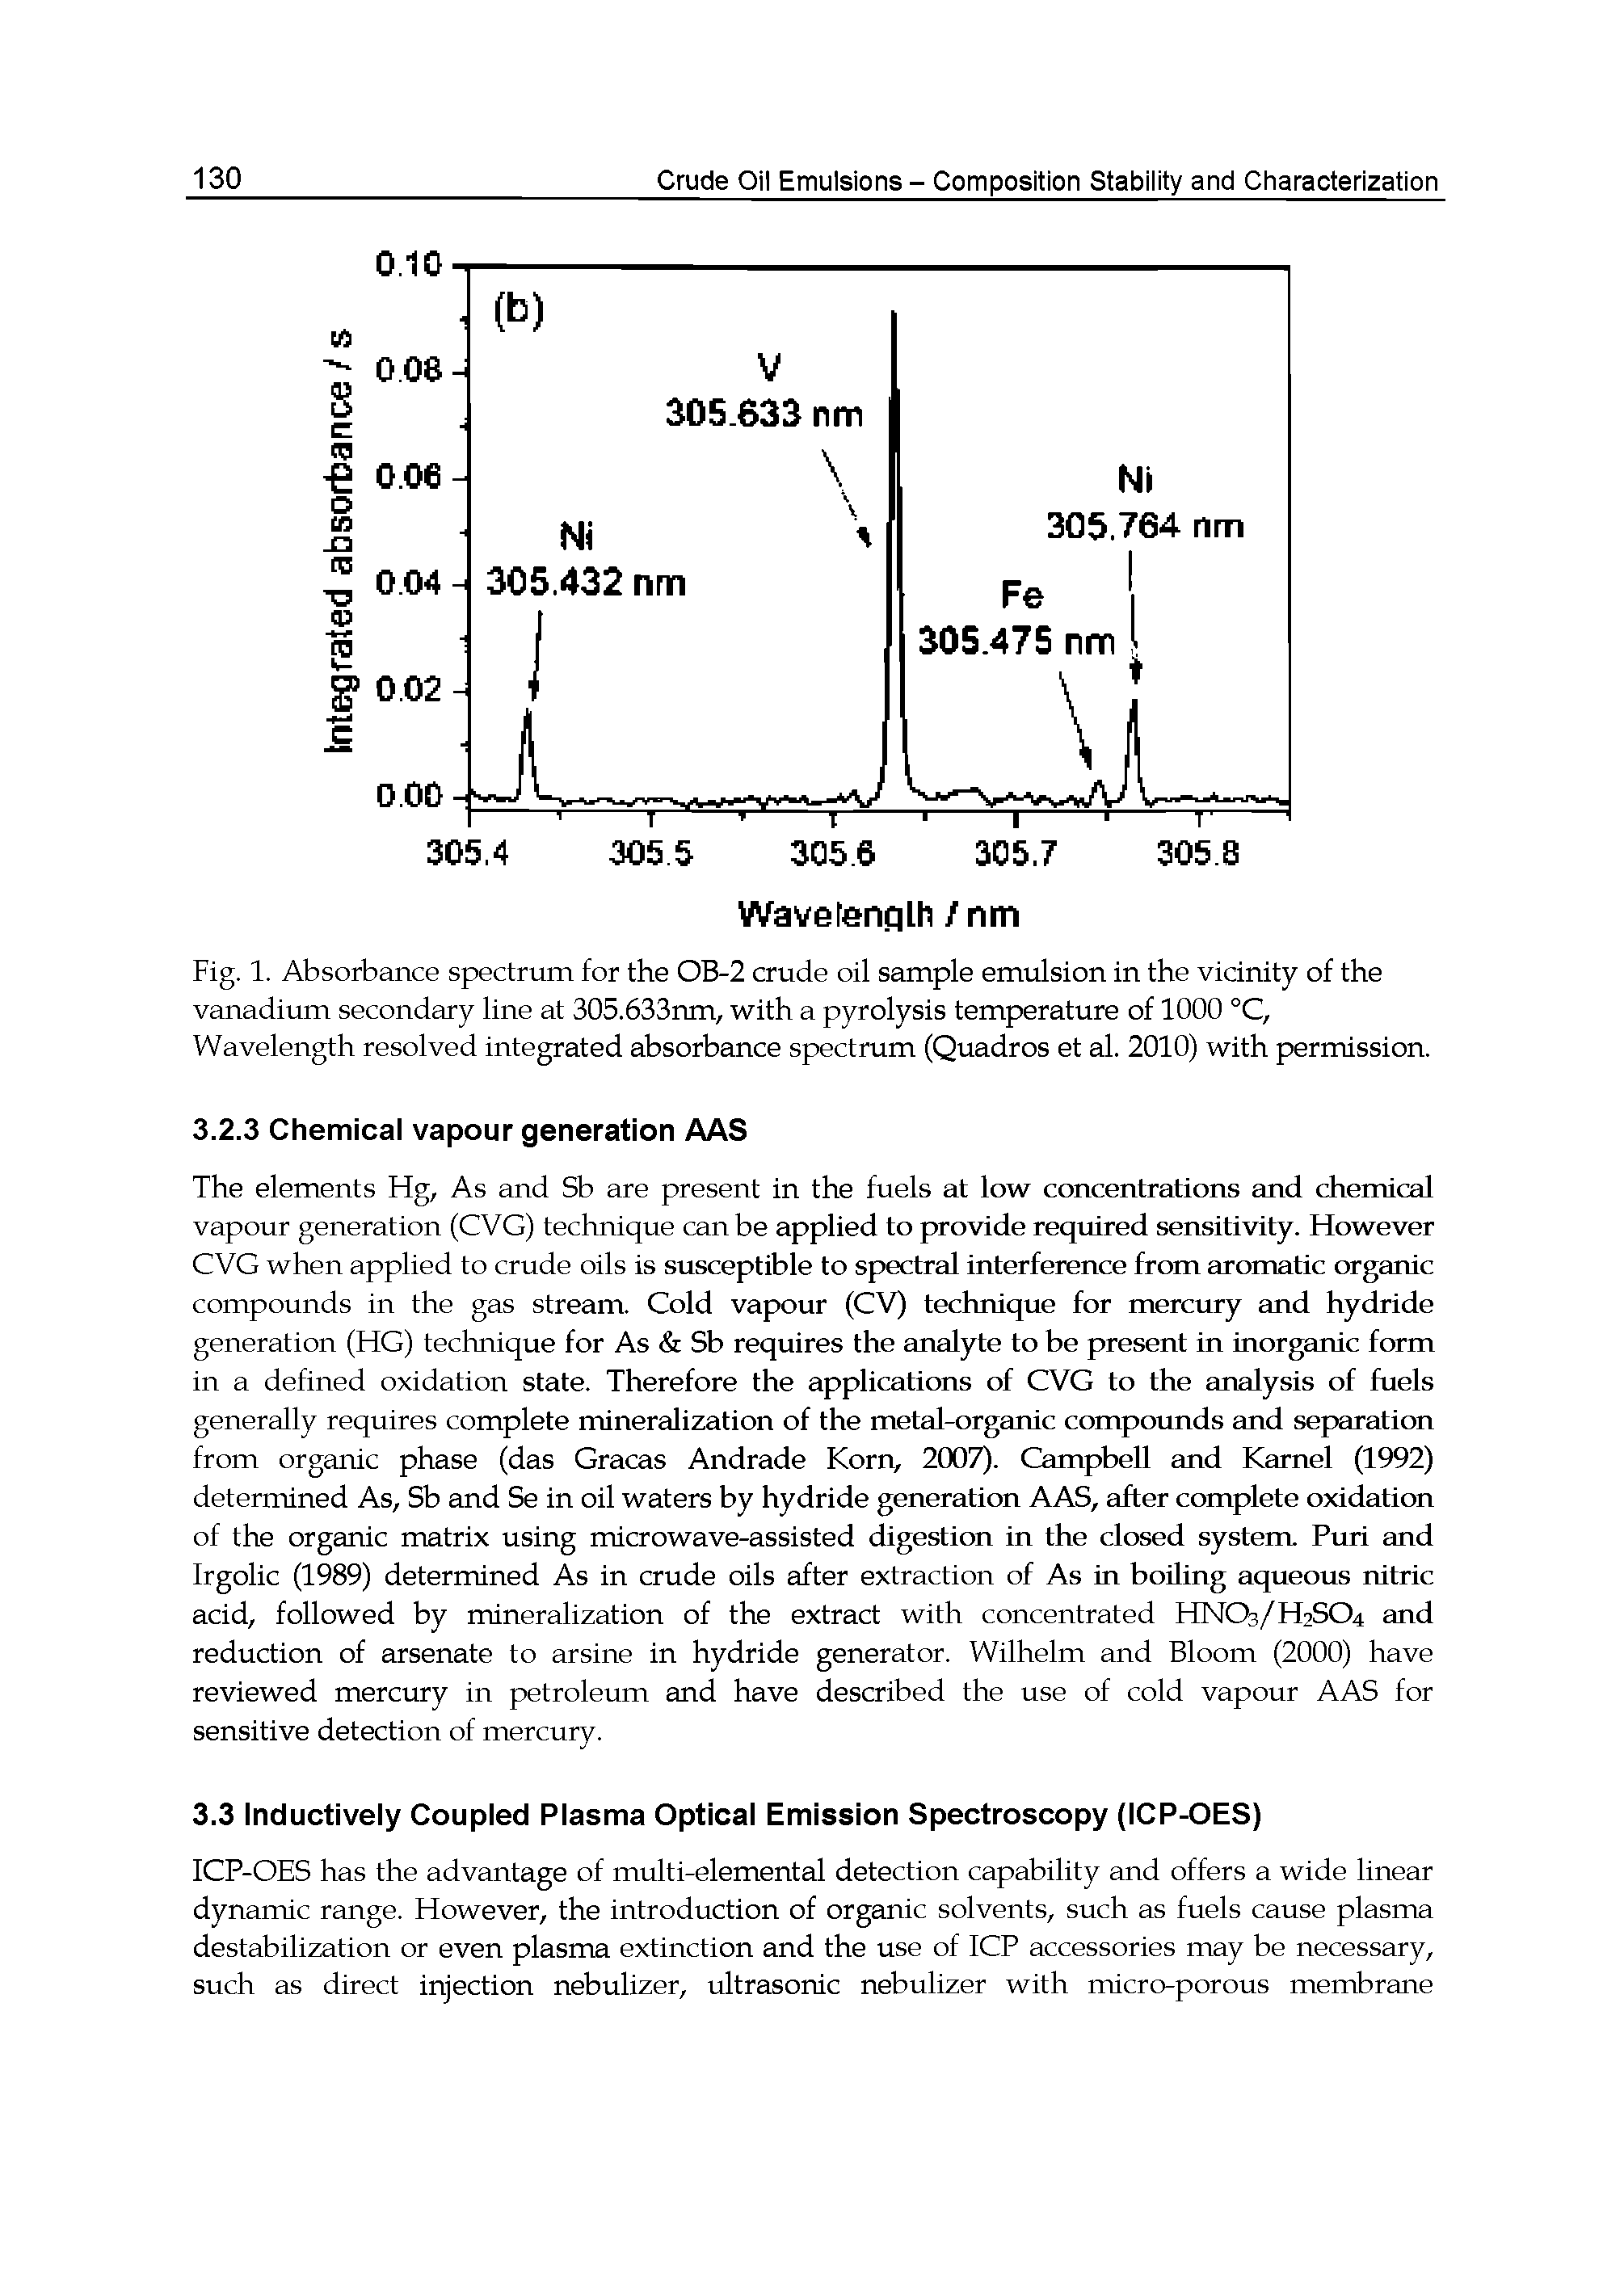 Fig. 1. Absorbance spectrum for the OB-2 crude oil sample emulsion in the vicinity of the vanadium secondary line at 305.633nm, with a pyrolysis temperature of 1000 °C,...